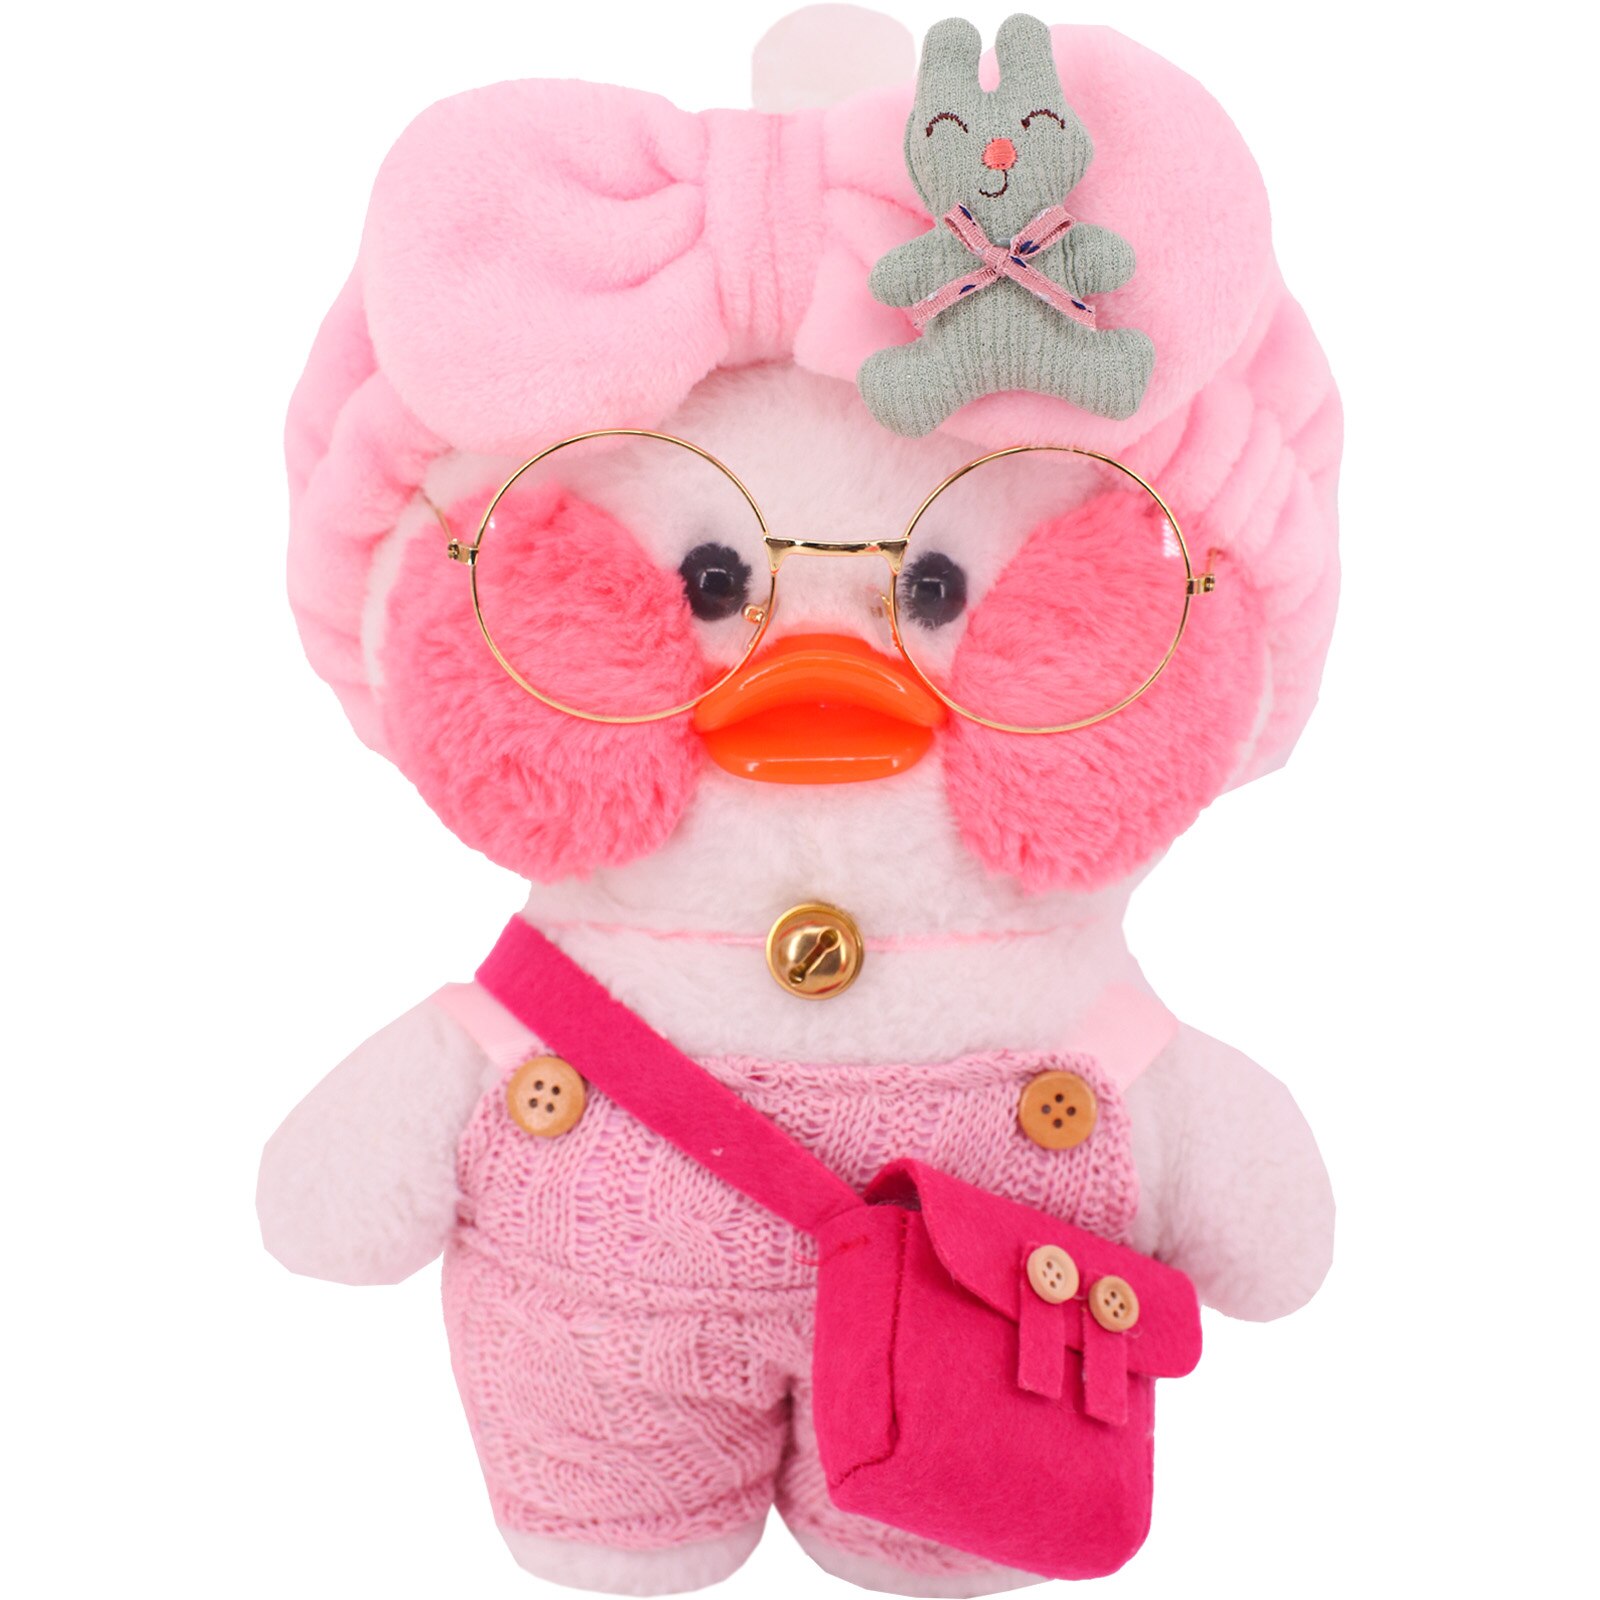 Kawaii Pink Duck Clothes Accessories lalafanfan Clothes Hat Skirt for 30 Cm Pink Duck Animal Plush 4 - Lalafanfan Shop